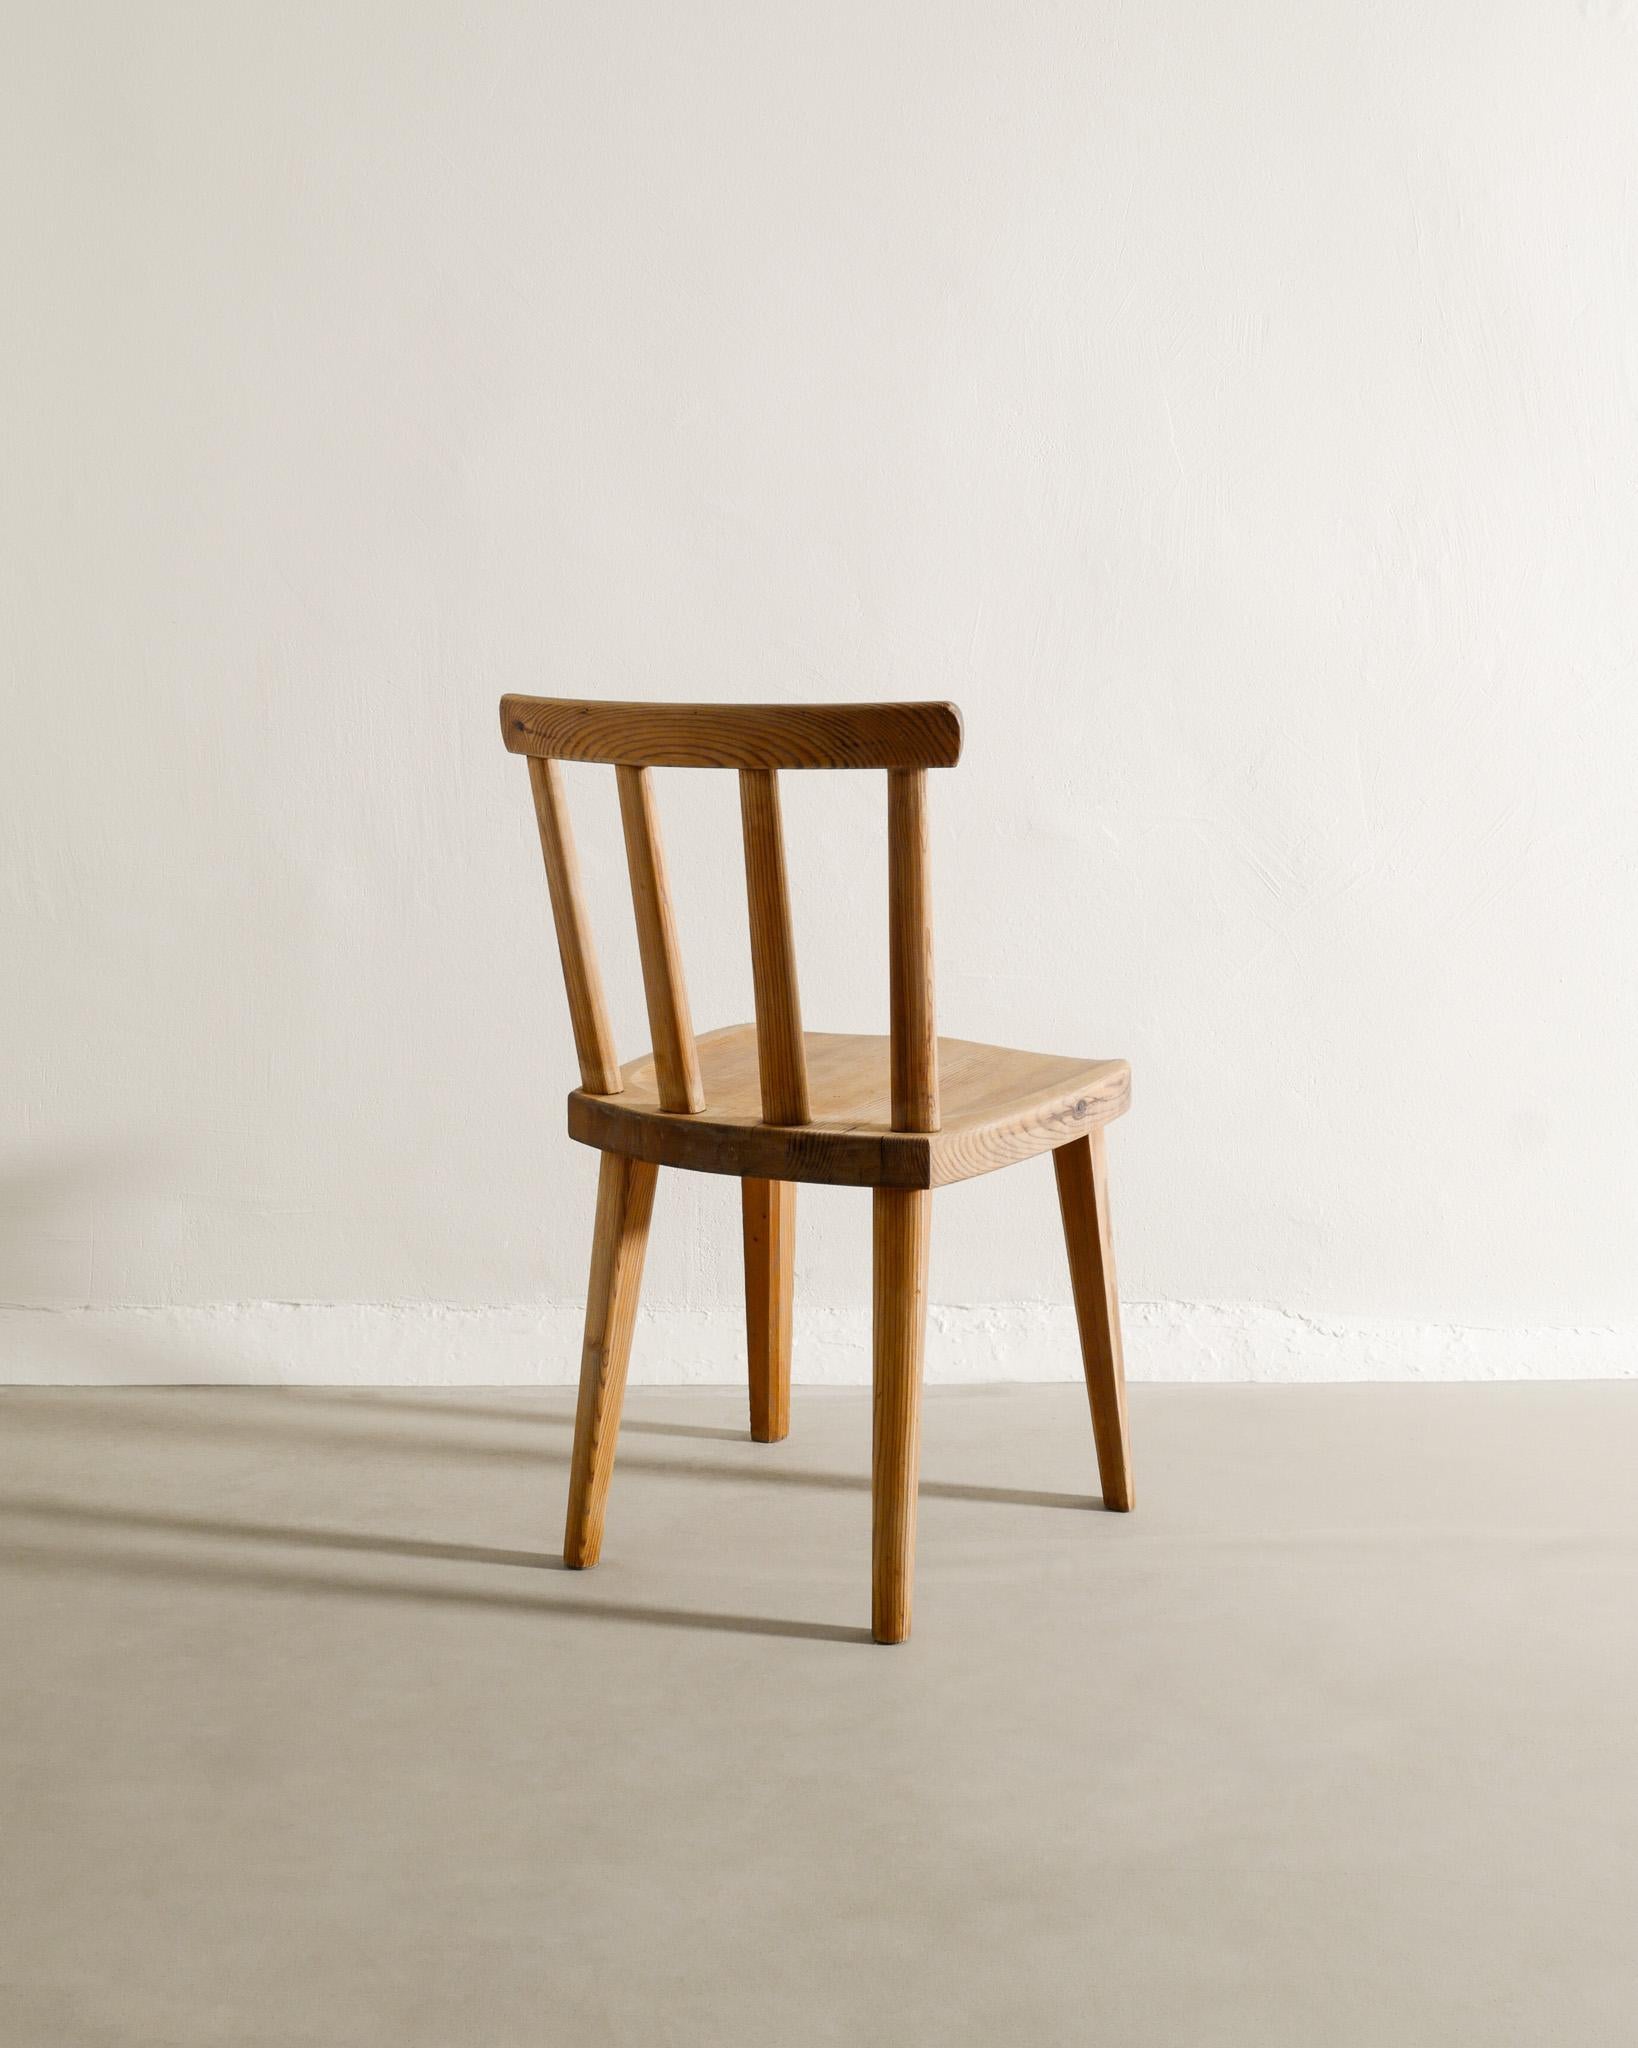 Scandinavian Modern Single Wooden Dining Utö Chair in Pine by Axel Einar Hjorth for NK Sweden, 1932 For Sale